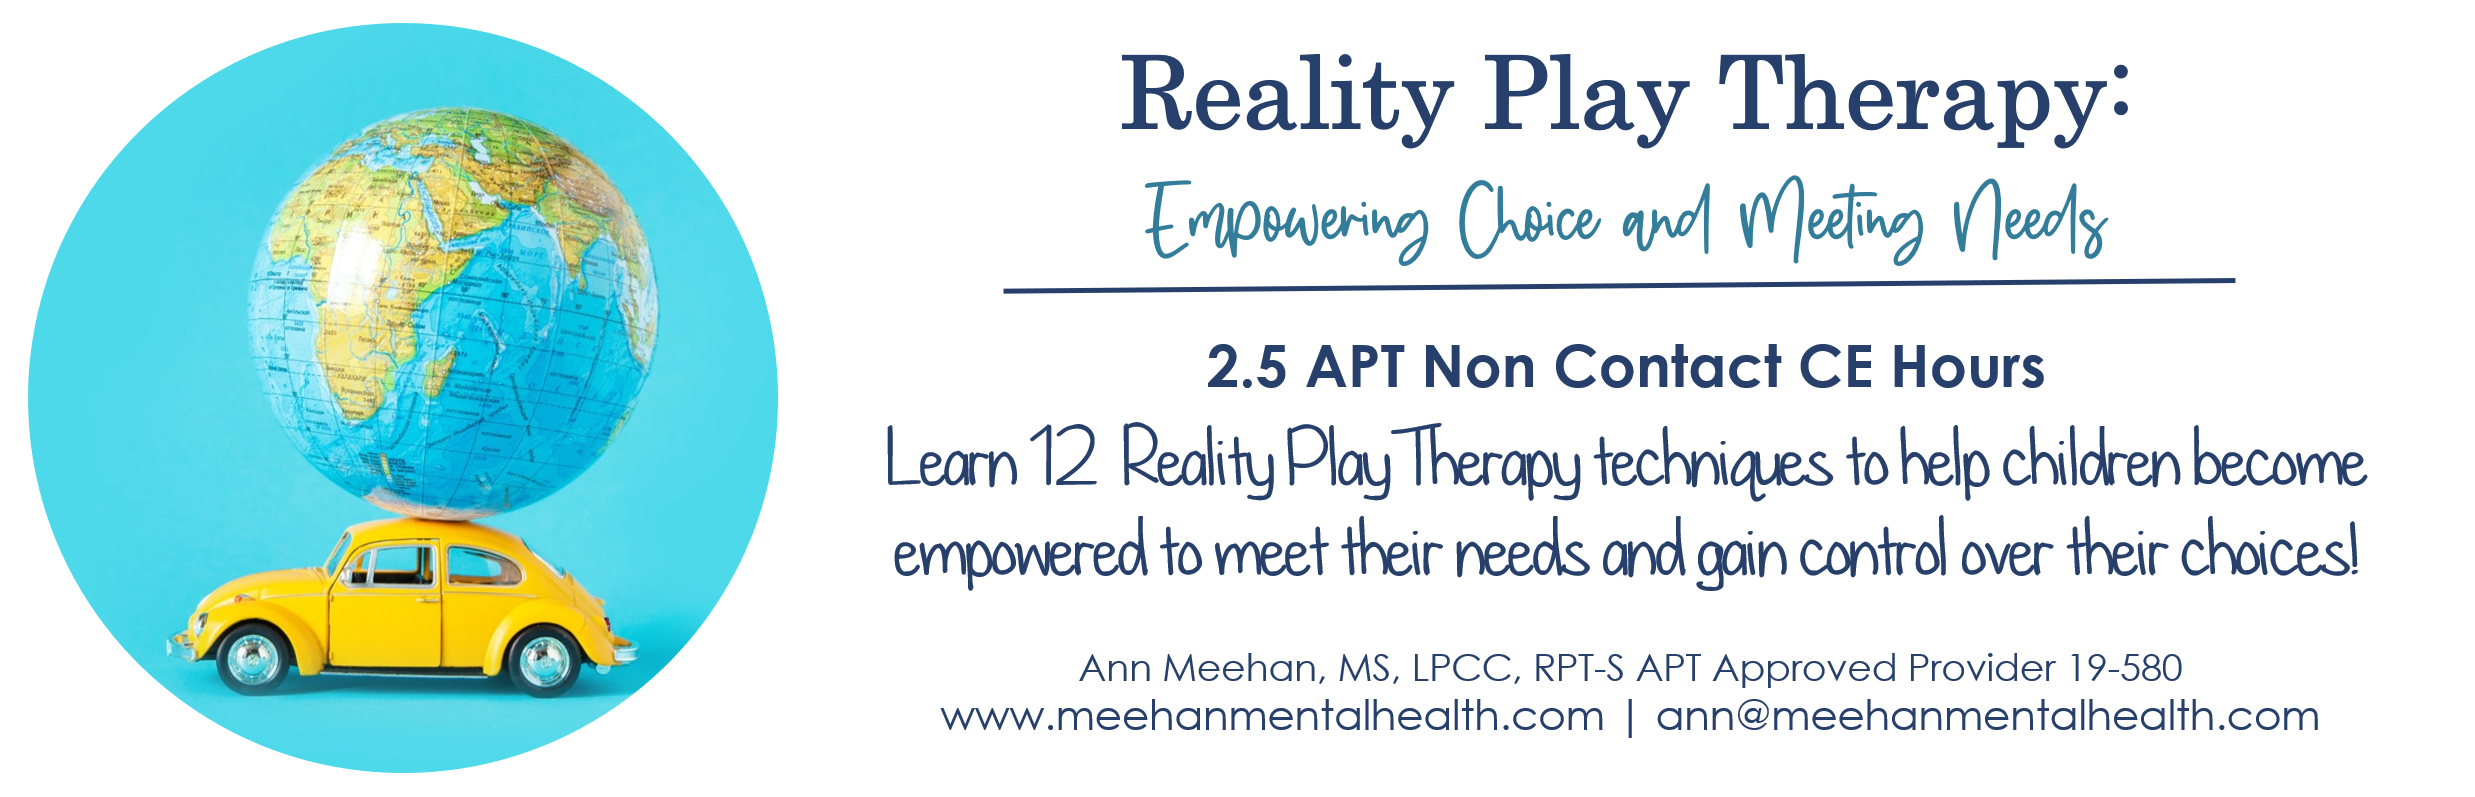 PROGRAM HIGHLIGHT: Playing and Doing Play Therapy - UNCONDITIONAL